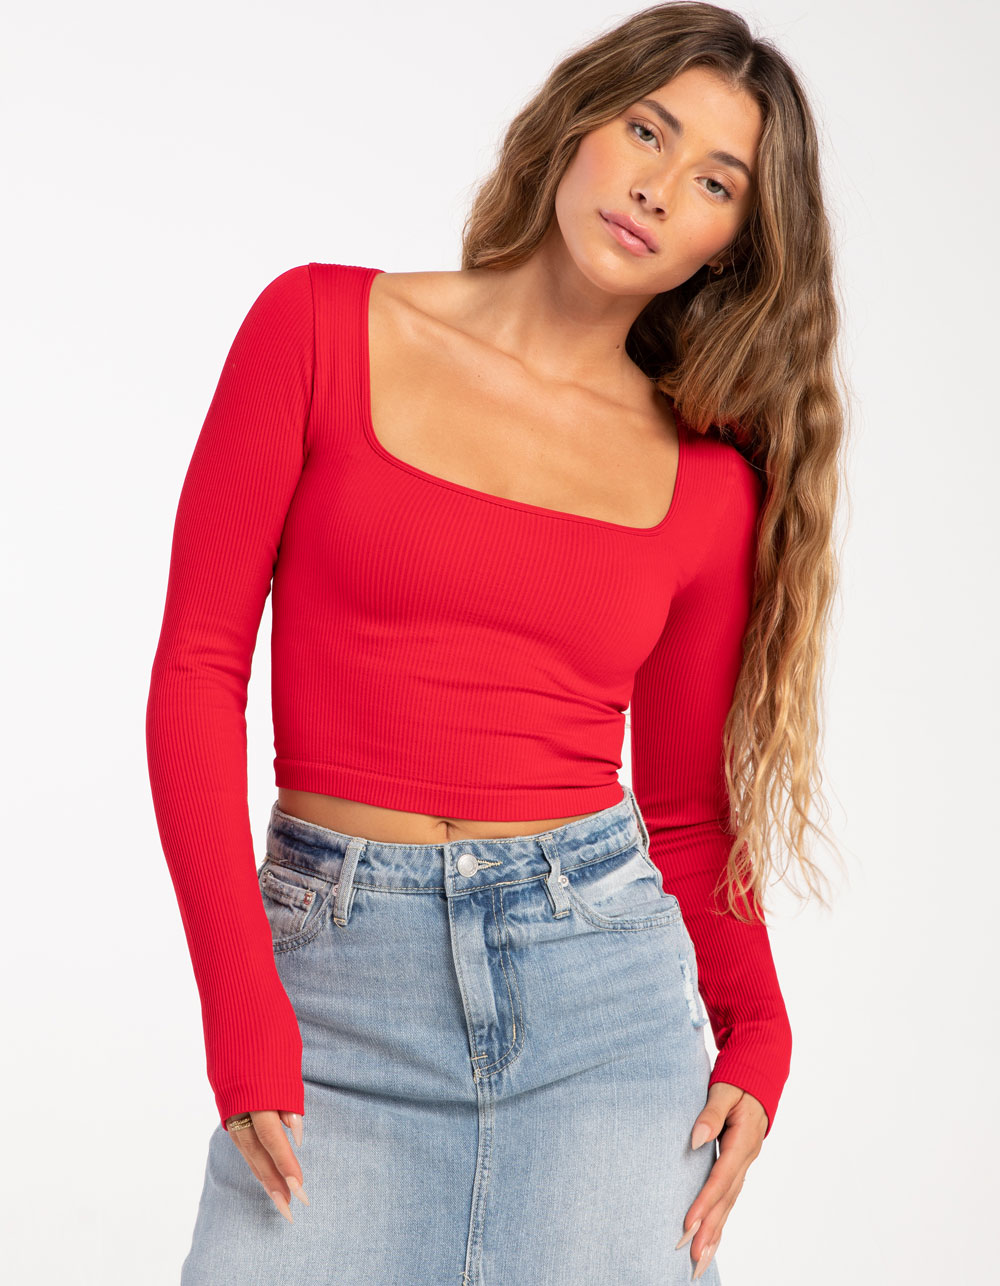 FULL TILT Seamless Square Neck Womens Crop Long Sleeve Top - RED